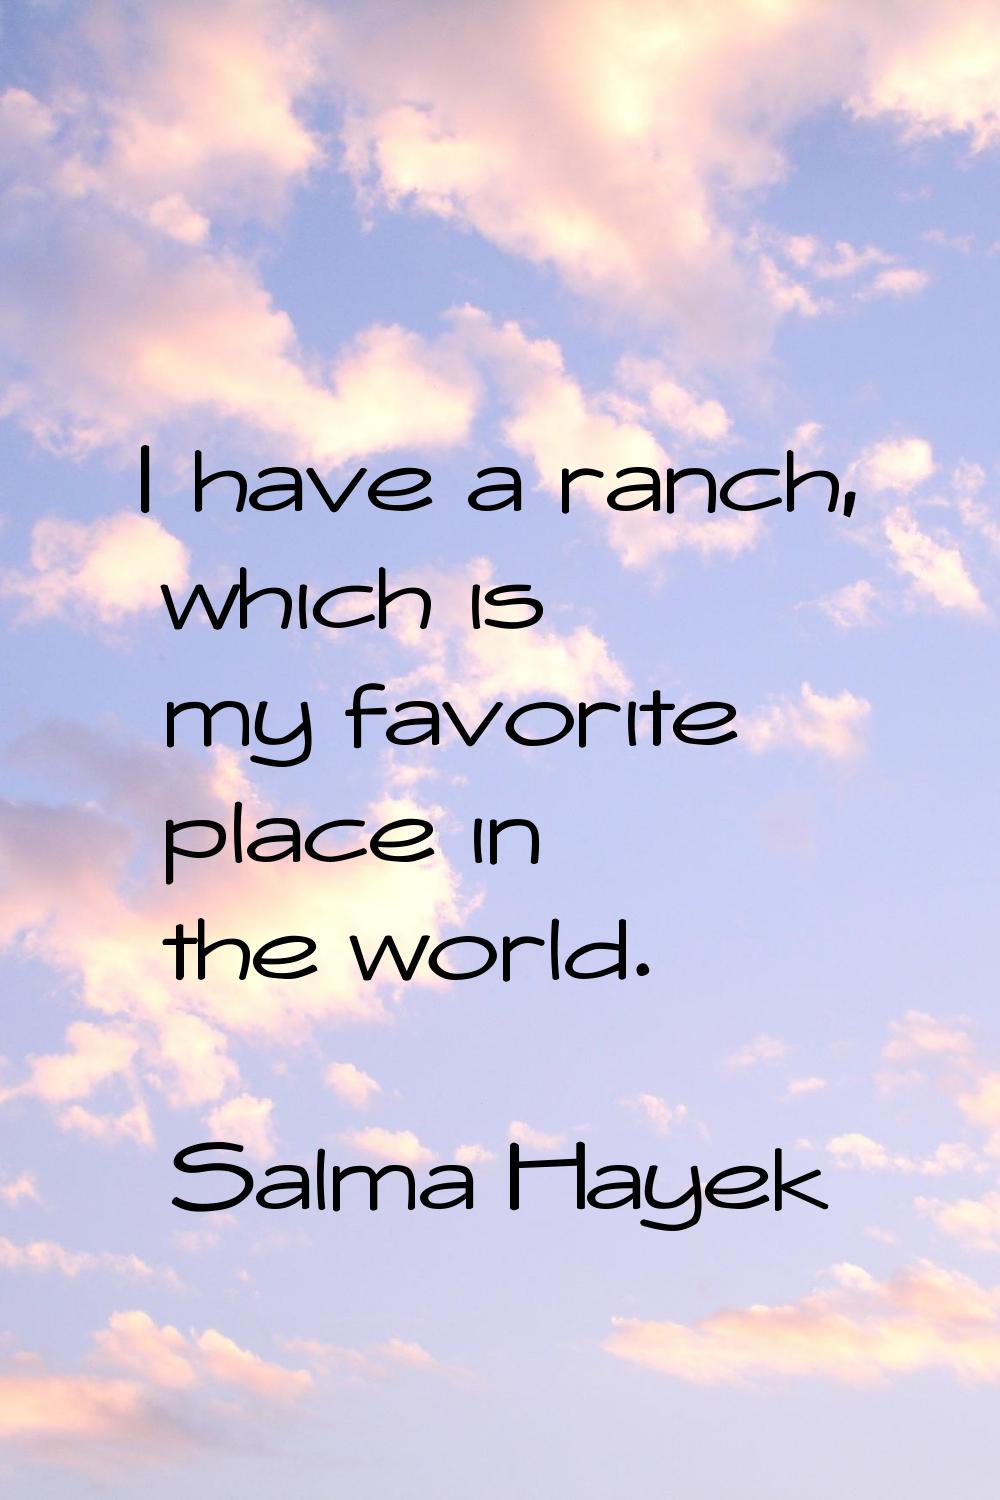 I have a ranch, which is my favorite place in the world.